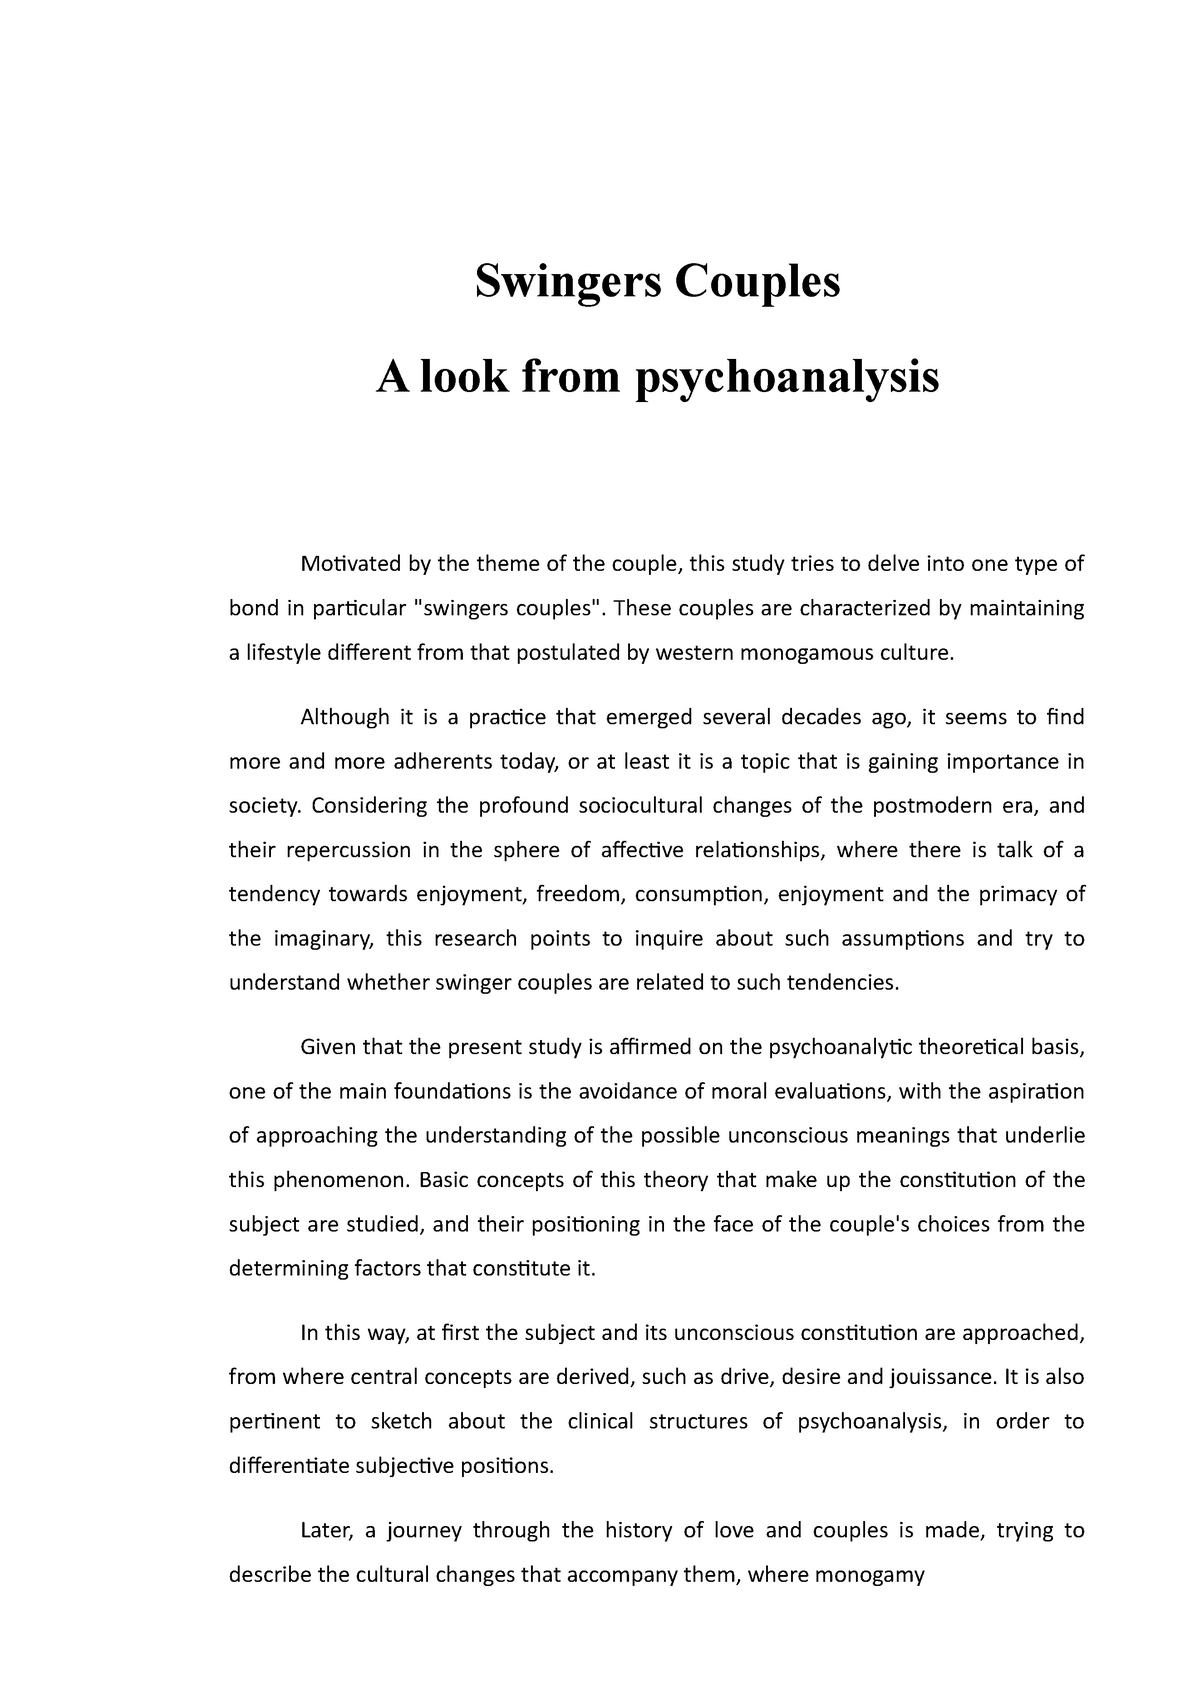 Swingers couples - Grade 10 - Swingers Couples A look from psychoanalysis Motivated by the theme of